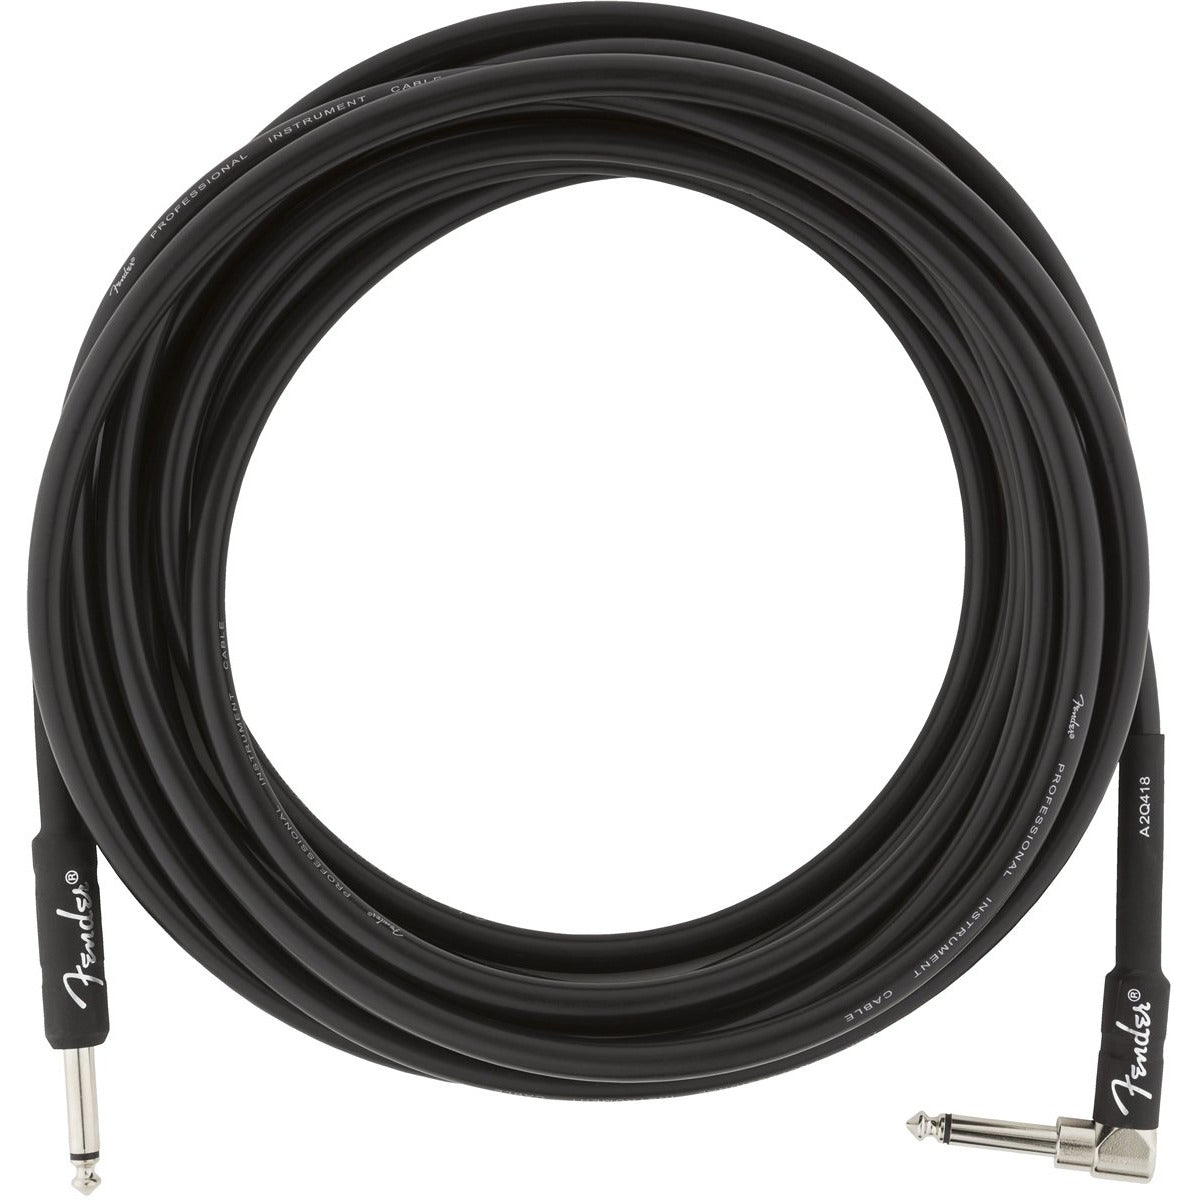 Image 2 of Fender Professional Series Instrument Cable, 18.6', Angled End, Black - SKU# FPRO-186A-B : Product Type Cables & Accessories : Elderly Instruments